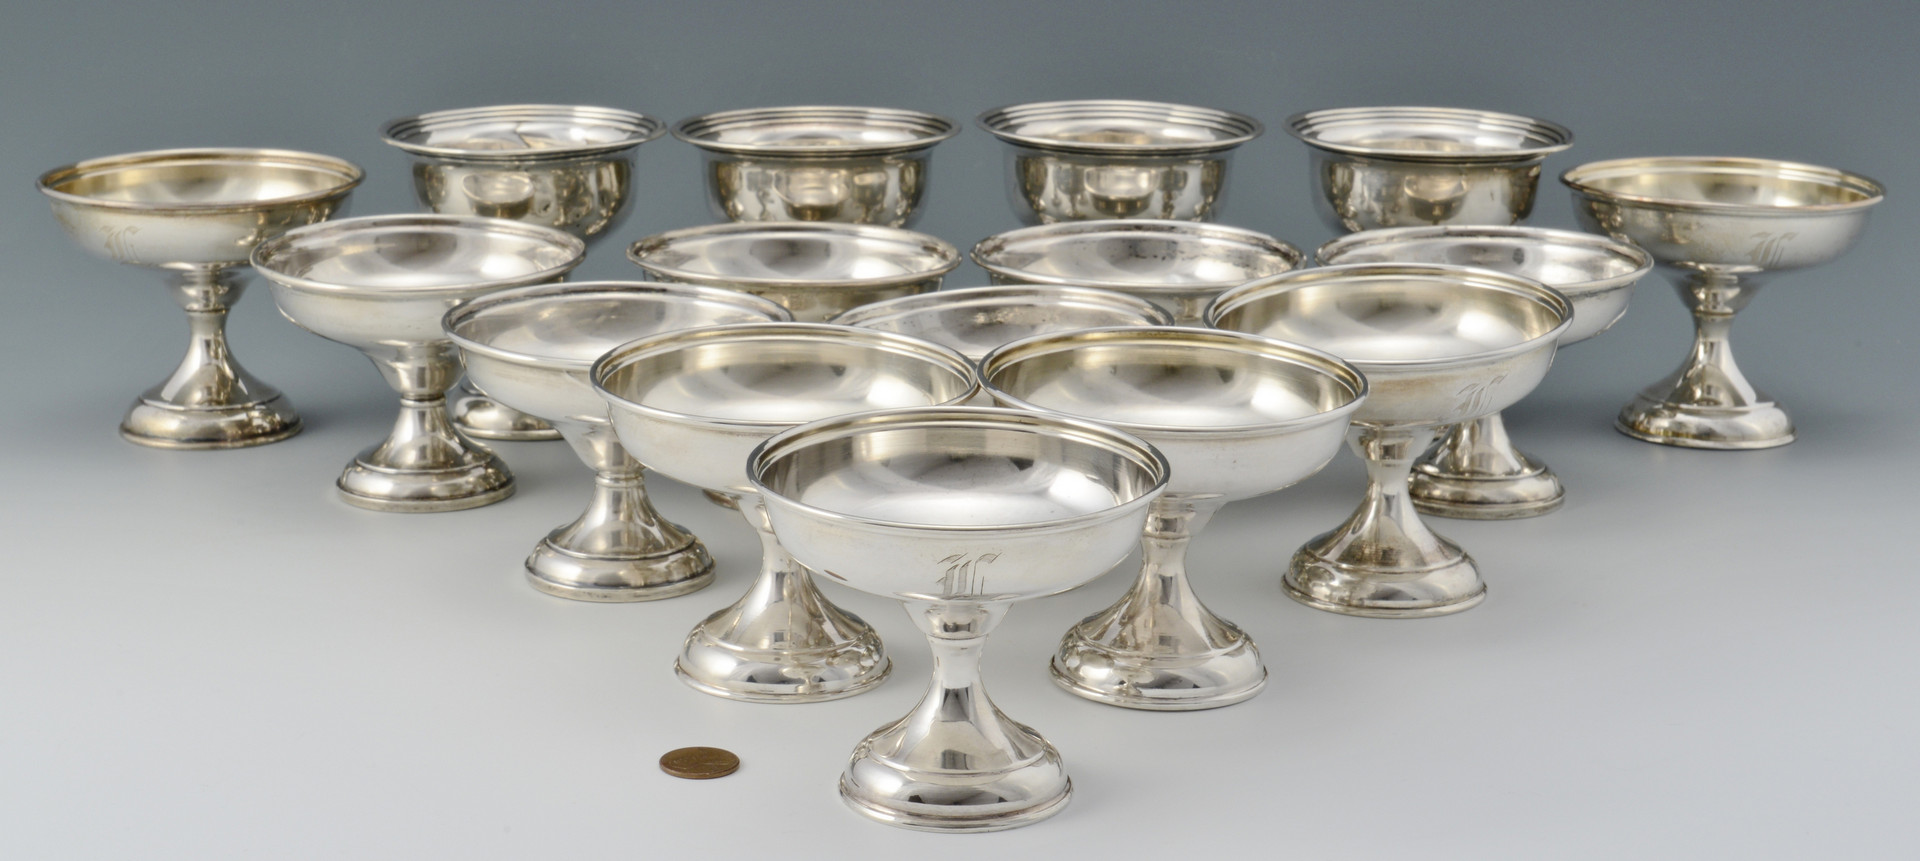 Lot 800: 16 Sterling Weighted Sherbets